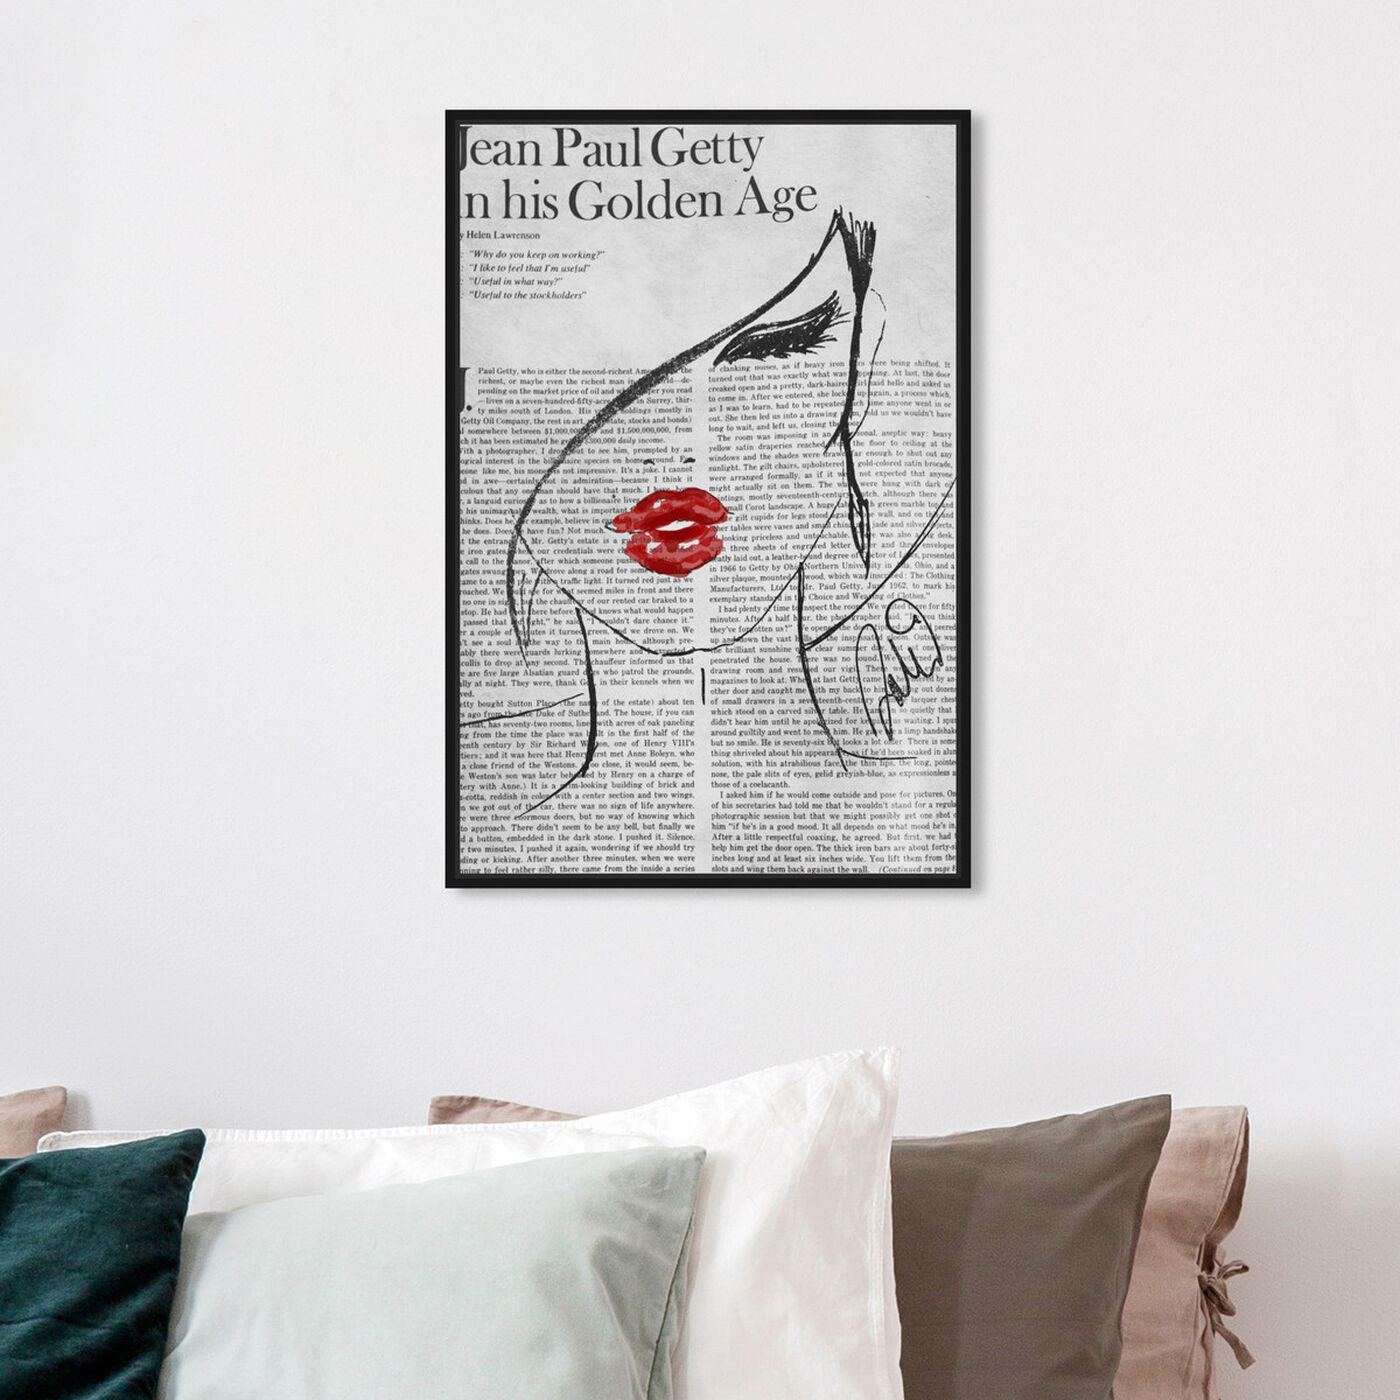 Hanging view of Fashionista Lunaire featuring fashion and glam and portraits art.